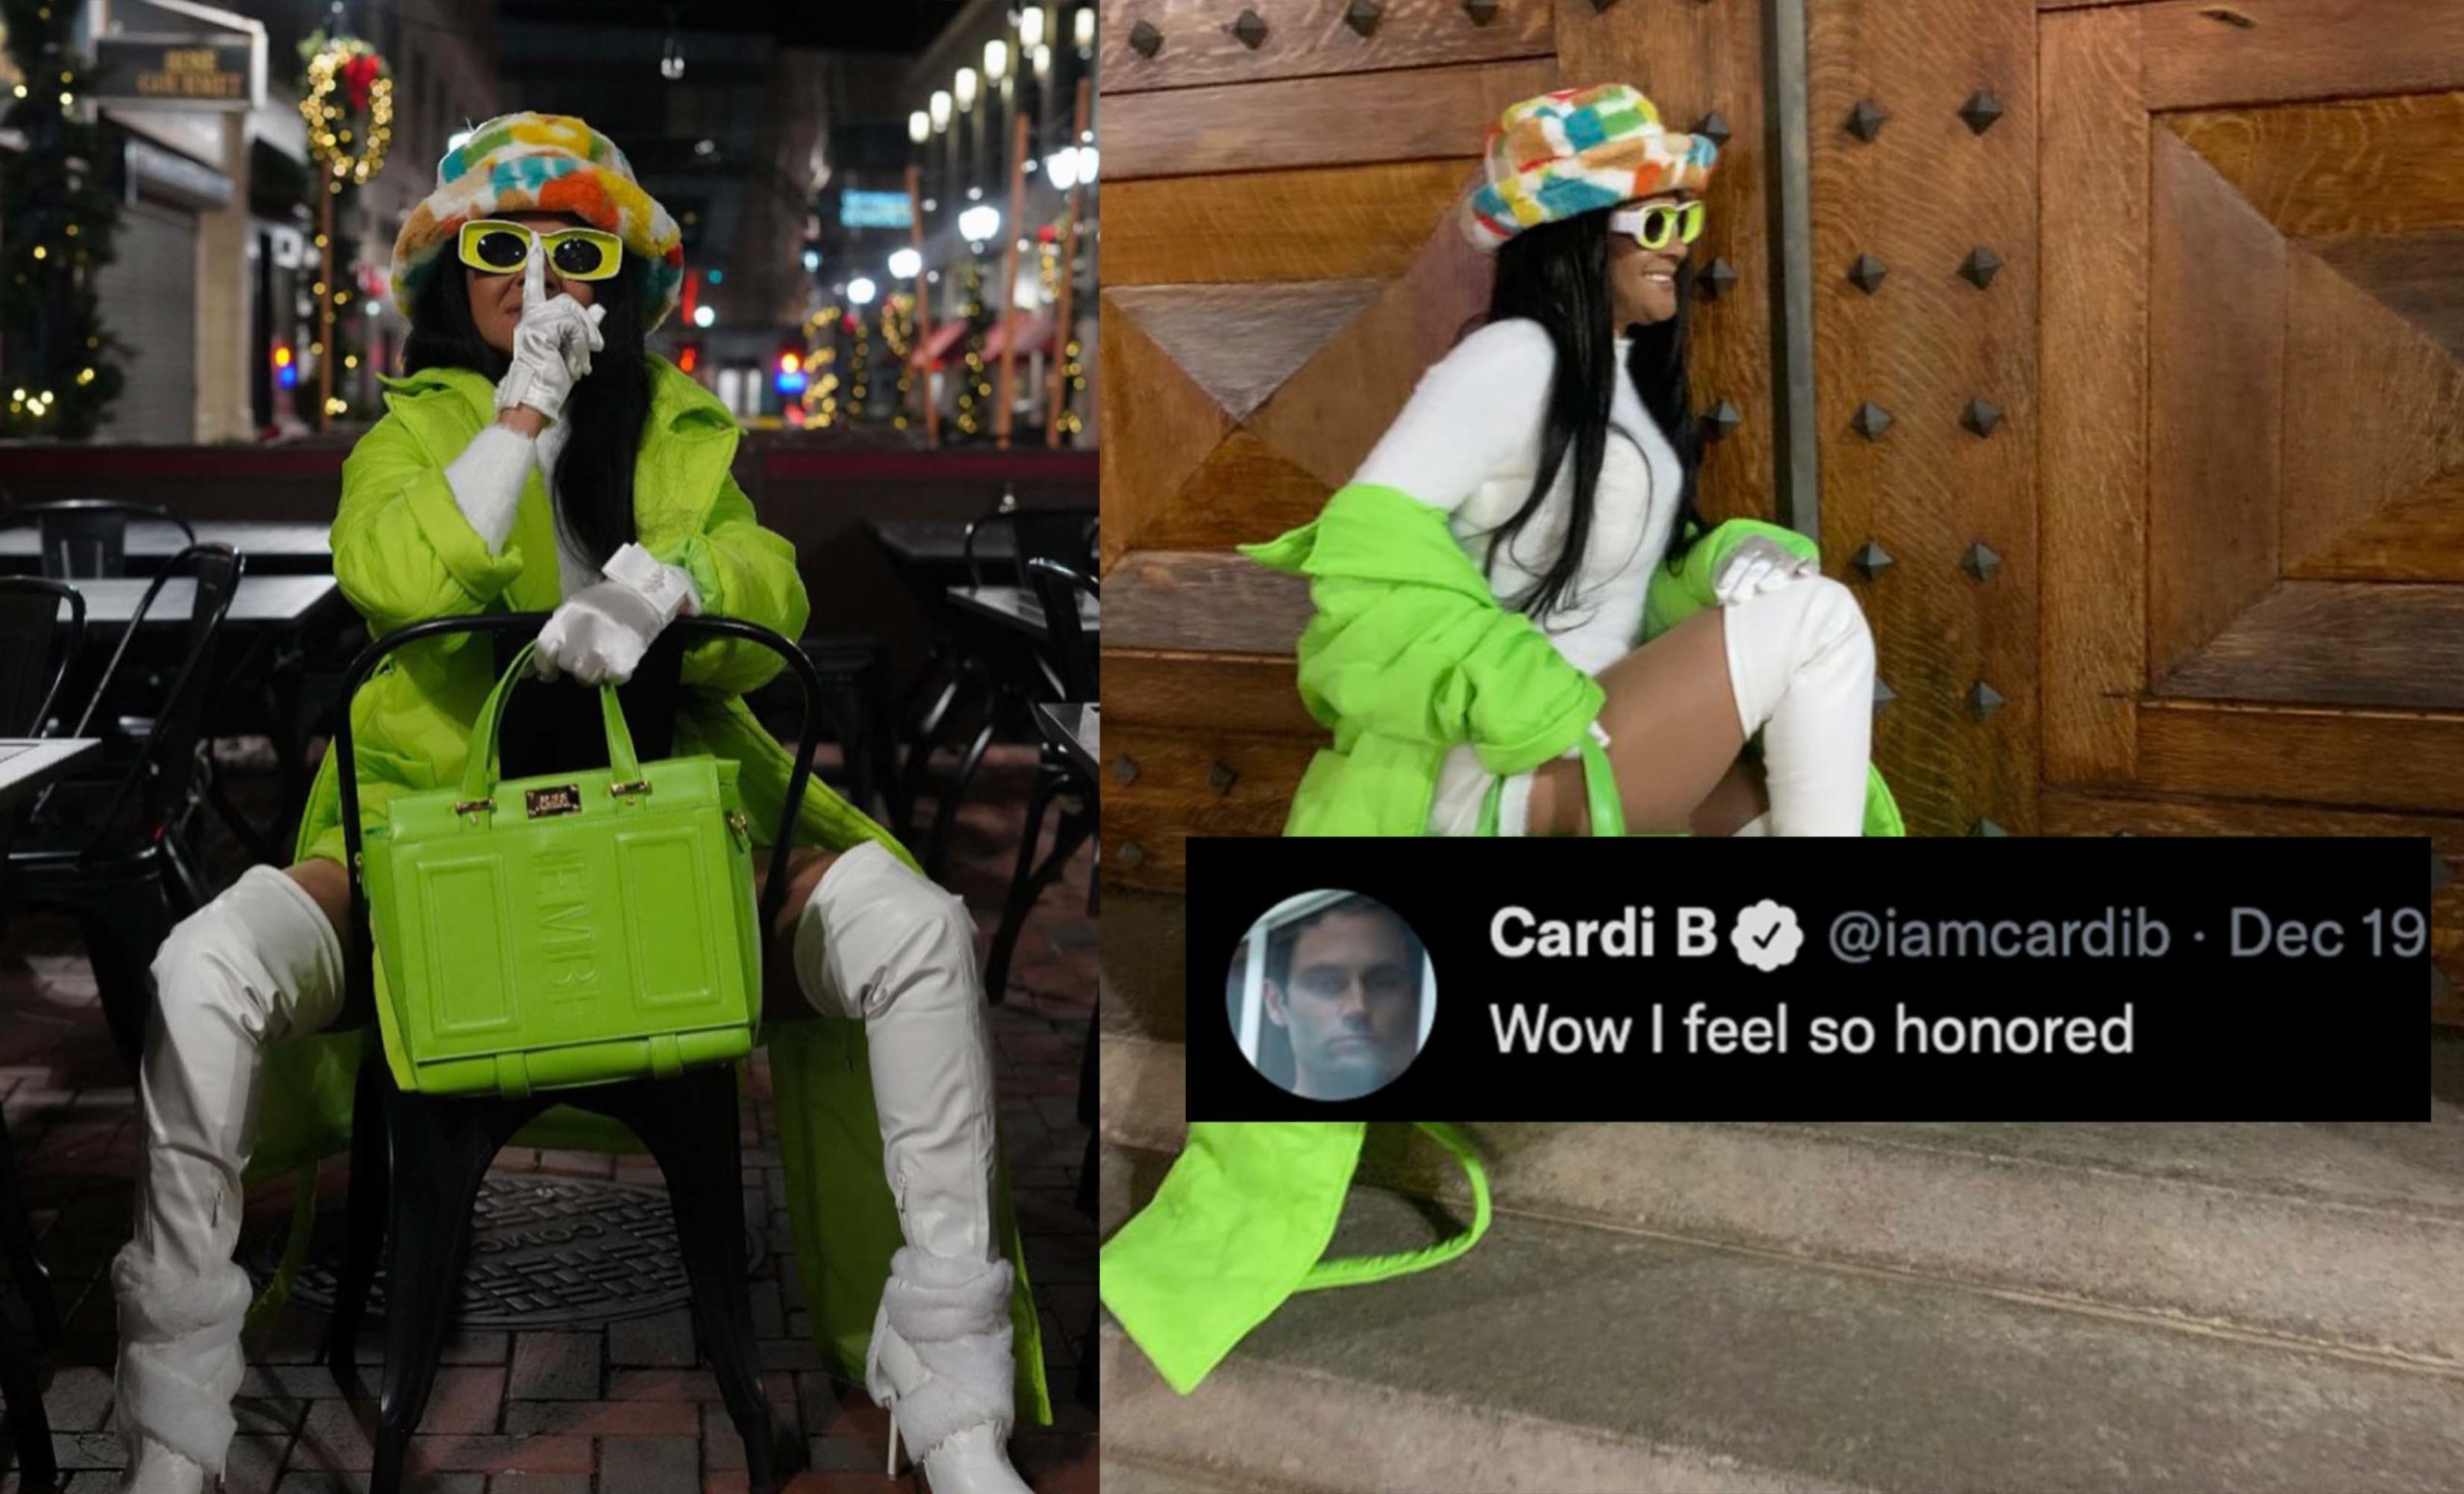 A 60-Year-Old Mom Models For Son’s Fashion Brand, Cardi B Applauds